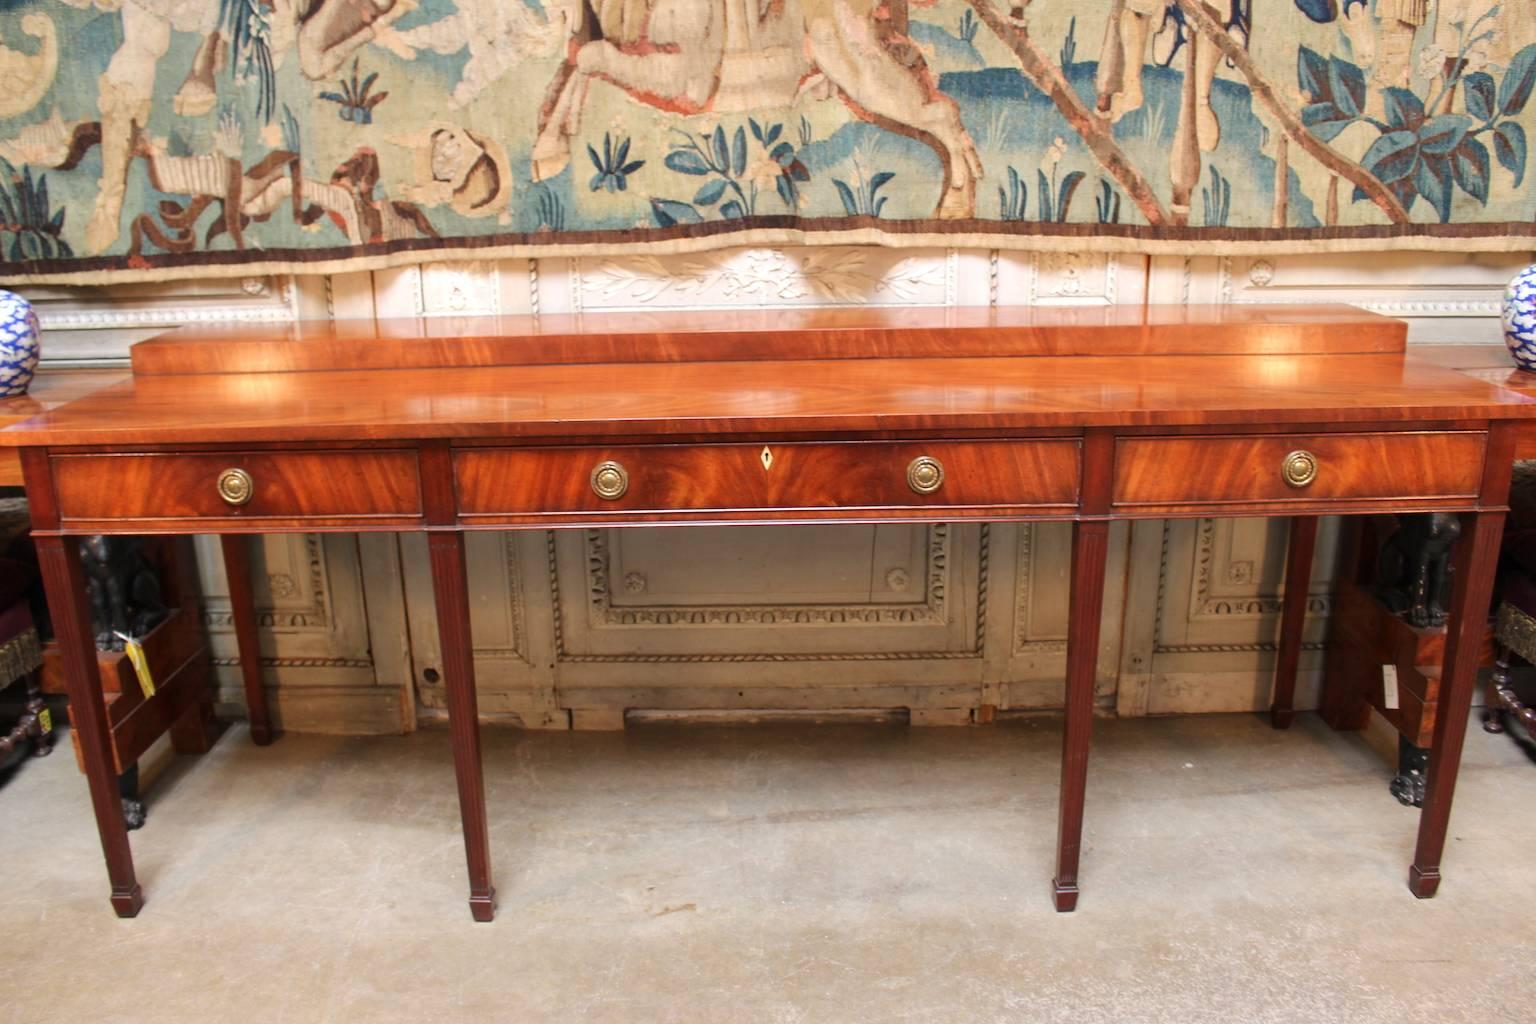 A very large English Hepplewhite style sideboard with three drawers and a two-tiered top.